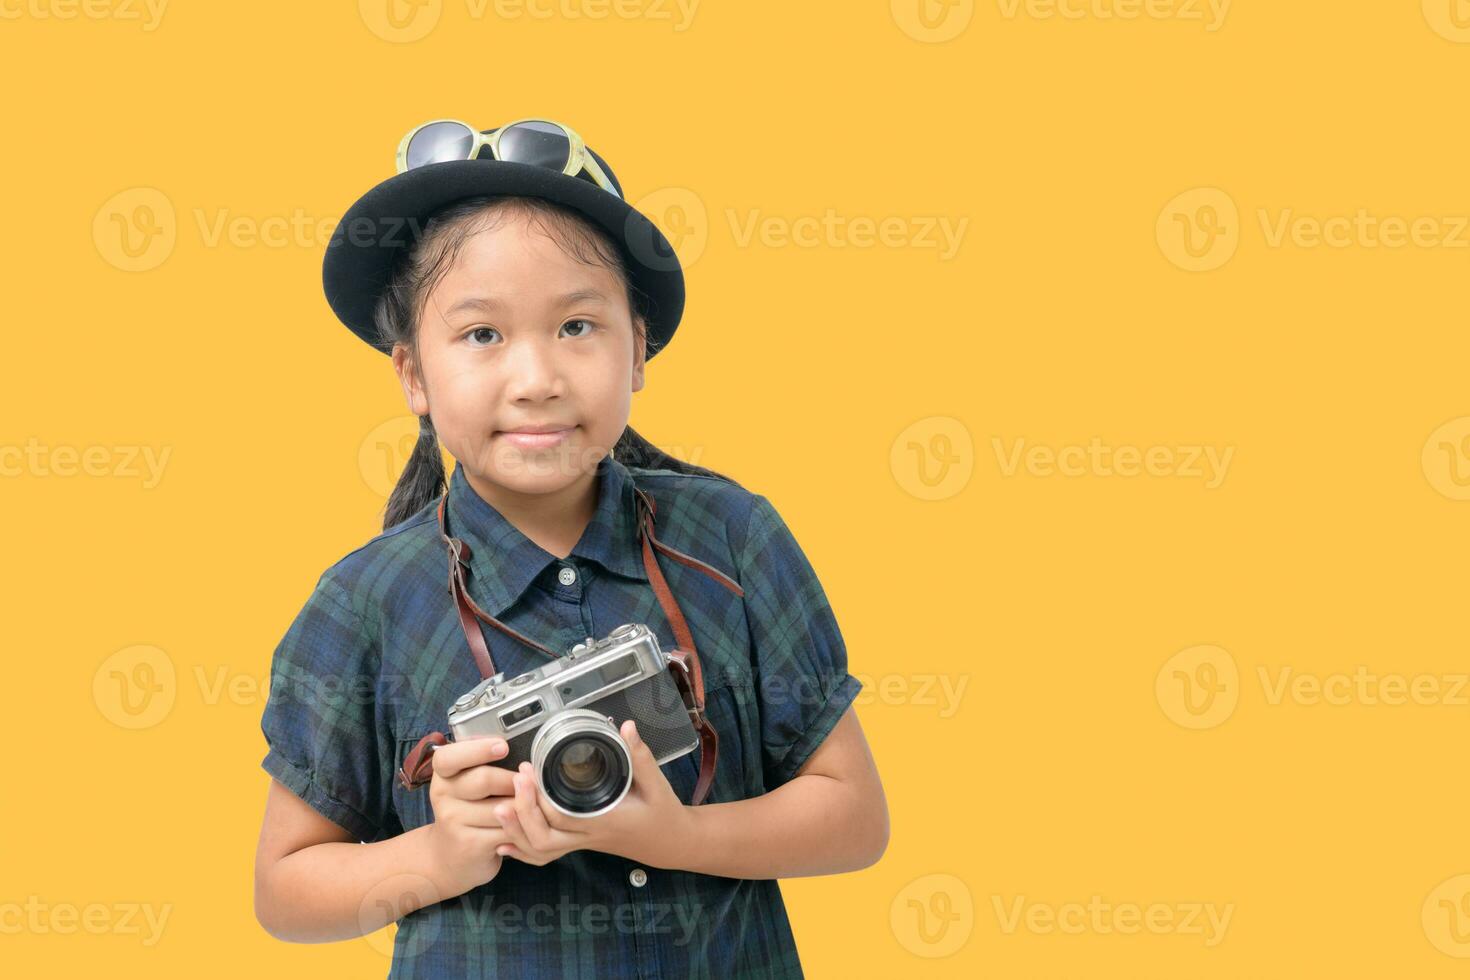 Cute little asian girl with sunglasses and holding vintage camera isolated photo